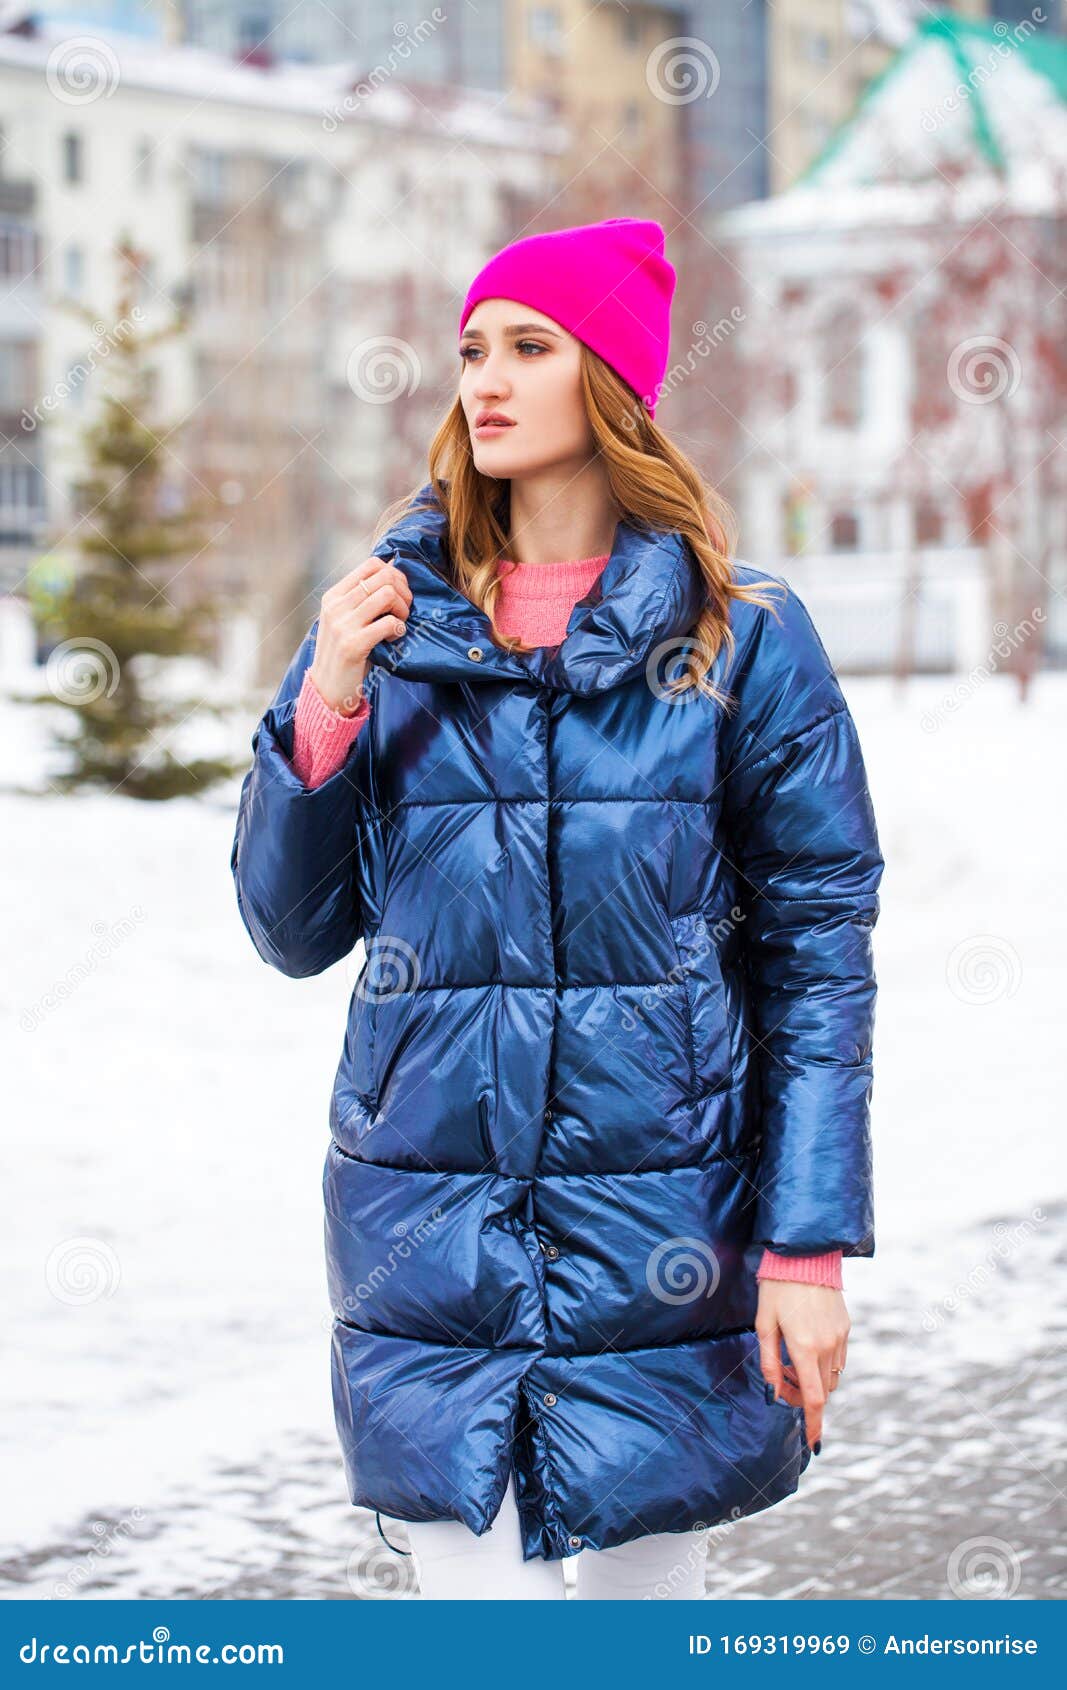 Young Blonde Woman in Blue Down Jacket in Winter Street Stock Image ...